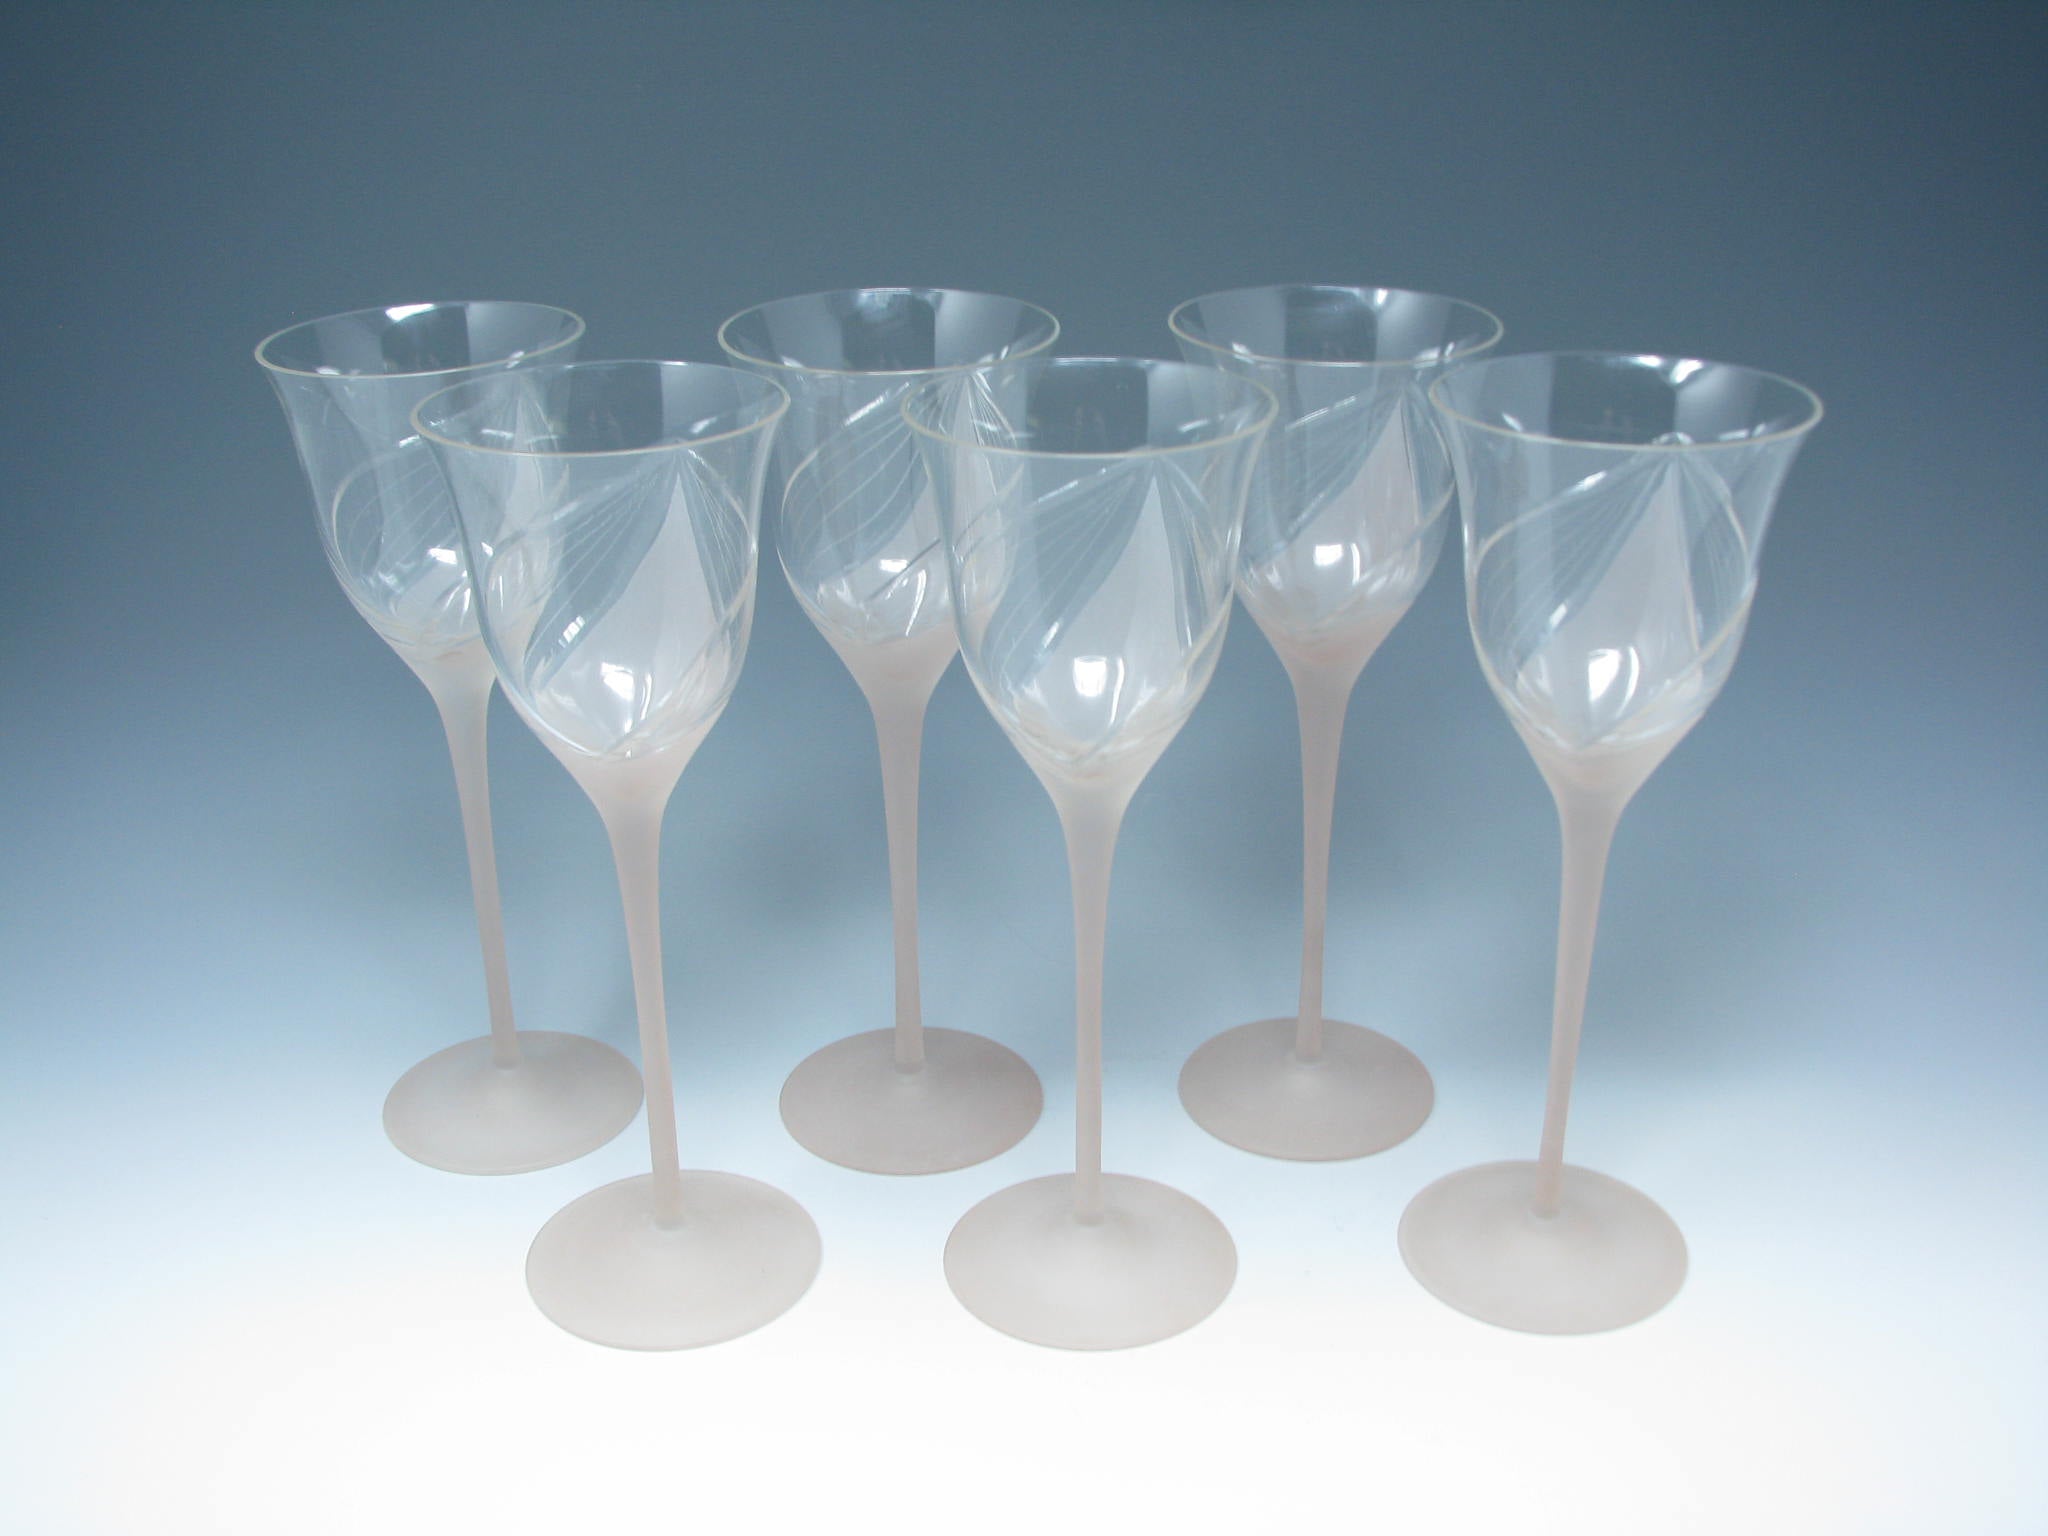 edgebrookhouse - Vintage Art Deco Style Pink Etched Glass Wine Goblets with Frosted Stem - 6 Pieces